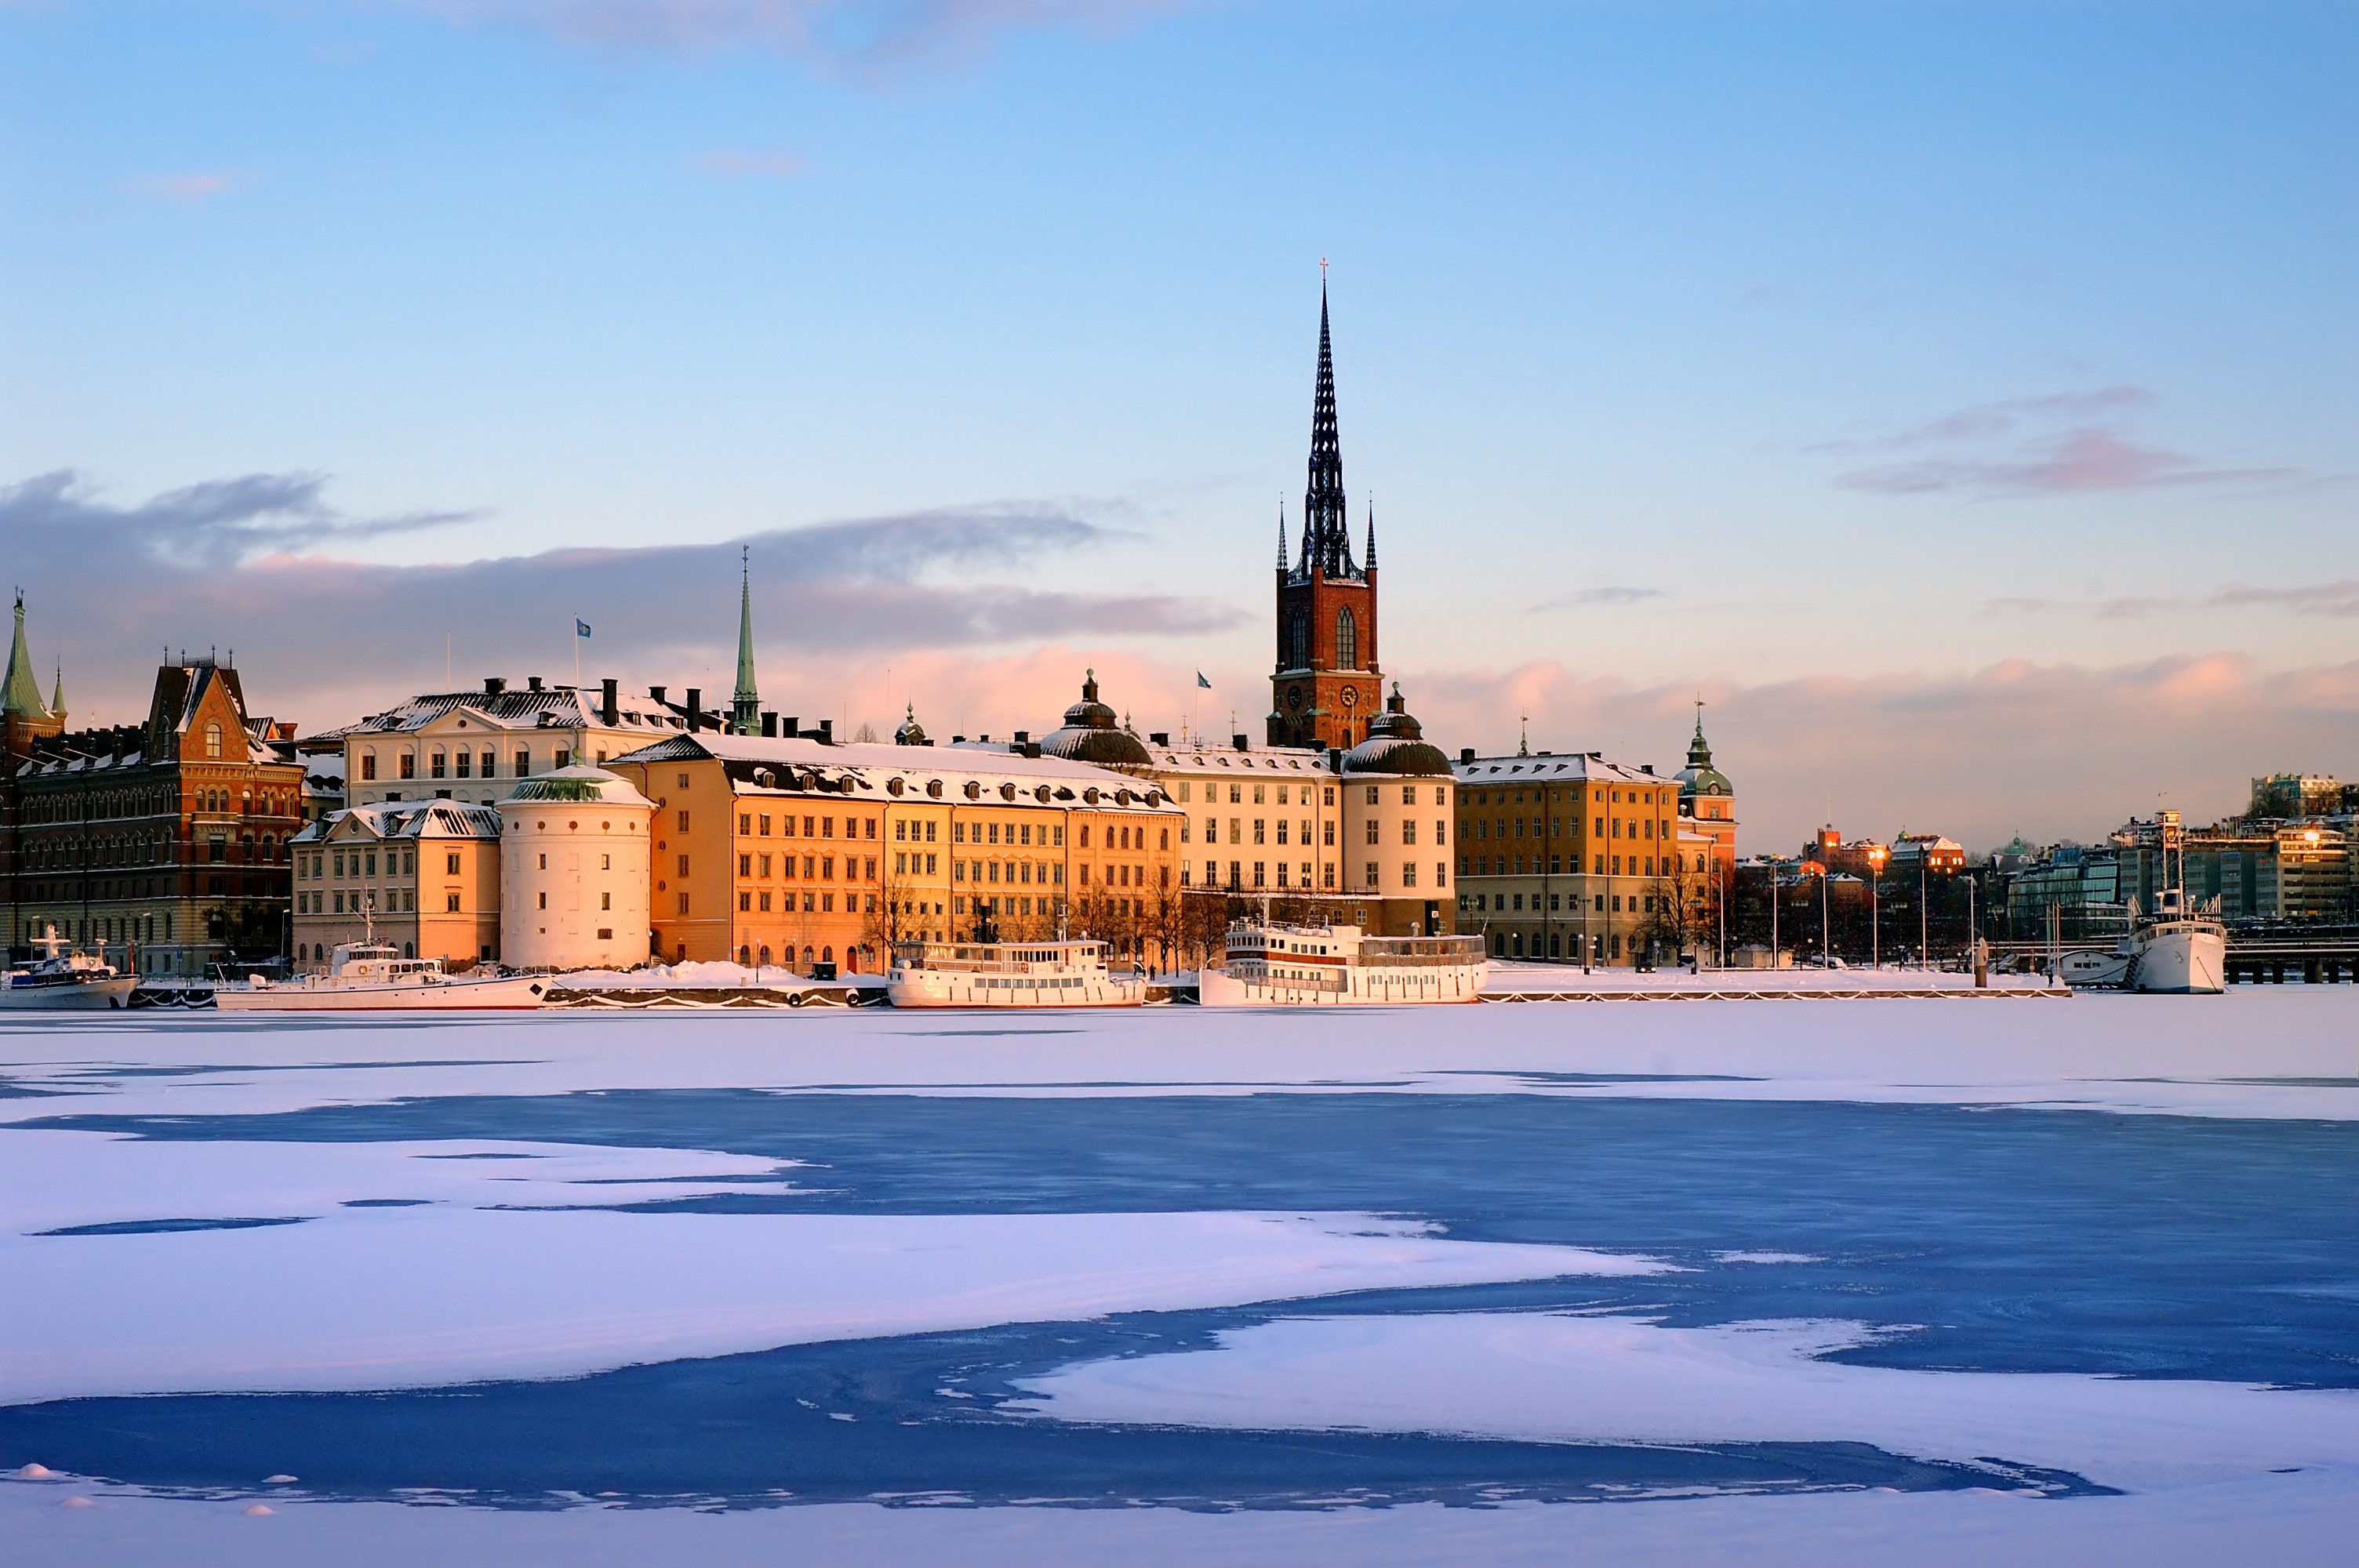 <p>Last but certainly not least is <a href="https://www.cntraveler.com/story/stockholm-sweden-andreas-bergman-joel-soderback-locals-guide?mbid=synd_msn_rss&utm_source=msn&utm_medium=syndication">Stockholm</a>. Sweden's capital city is made of 14 islands connected by a robust public transport network including a metro system with 100 stations, ferries, buses, and trams.</p> <p>Stockholm’s metro, the Tunnelbana (or T-bana) forms <a href="https://www.architecturaldigest.com/gallery/stockholm-subway?mbid=synd_msn_rss&utm_source=msn&utm_medium=syndication">the world’s longest art gallery</a>. Though initially envisioned as a way to reduce traffic, Stockholm’s underground embraces another worthy goal: making art accessible to people of all economic backgrounds. Today, 94 of the T-bana’s 100 stations feature the work of 250 artists, including paintings, sculptures, and large-scale installations.</p> <p>The art at most stations depicts the history and culture of the surrounding neighborhoods, providing a colorful escape from the city’s gray winters. If you have a chance to visit, don’t miss the otherworldly Rådhuset station or Solna Centrum. The red cave-like ceiling mimics a forest sunset—look closer and you’ll find sporadic wall illustrations depicting social commentary from 1970s Sweden. Free guided art tours are available from June to August every Tuesday, Thursday, and Saturday at 3p.m., starting from the SL Customer Centre at T-Centralen.</p> <p>As you’d expect, the Stockholm metro is clean, climate-controlled, and sustainable. When you’re done soaking in the stunning stations of Stockholm metro, you can also see the city and attractions by ferry, for the same price as a bus or metro ticket (SEK 42 or about $3.86).</p> <p><strong>How to experience it:</strong> To see Stockholm from the water, hop on the <a href="https://visitsweden.com/where-to-go/middle-sweden/stockholm/sightseeing-local/">SL ferry line 80</a> and visit popular tourist attractions such as the Abba museum or wander around nature in Djurgården, a National City Park.</p><p>Sign up to receive the latest news, expert tips, and inspiration on all things travel</p><a href="https://www.cntraveler.com/newsletter/the-daily?sourceCode=msnsend">Inspire Me</a>